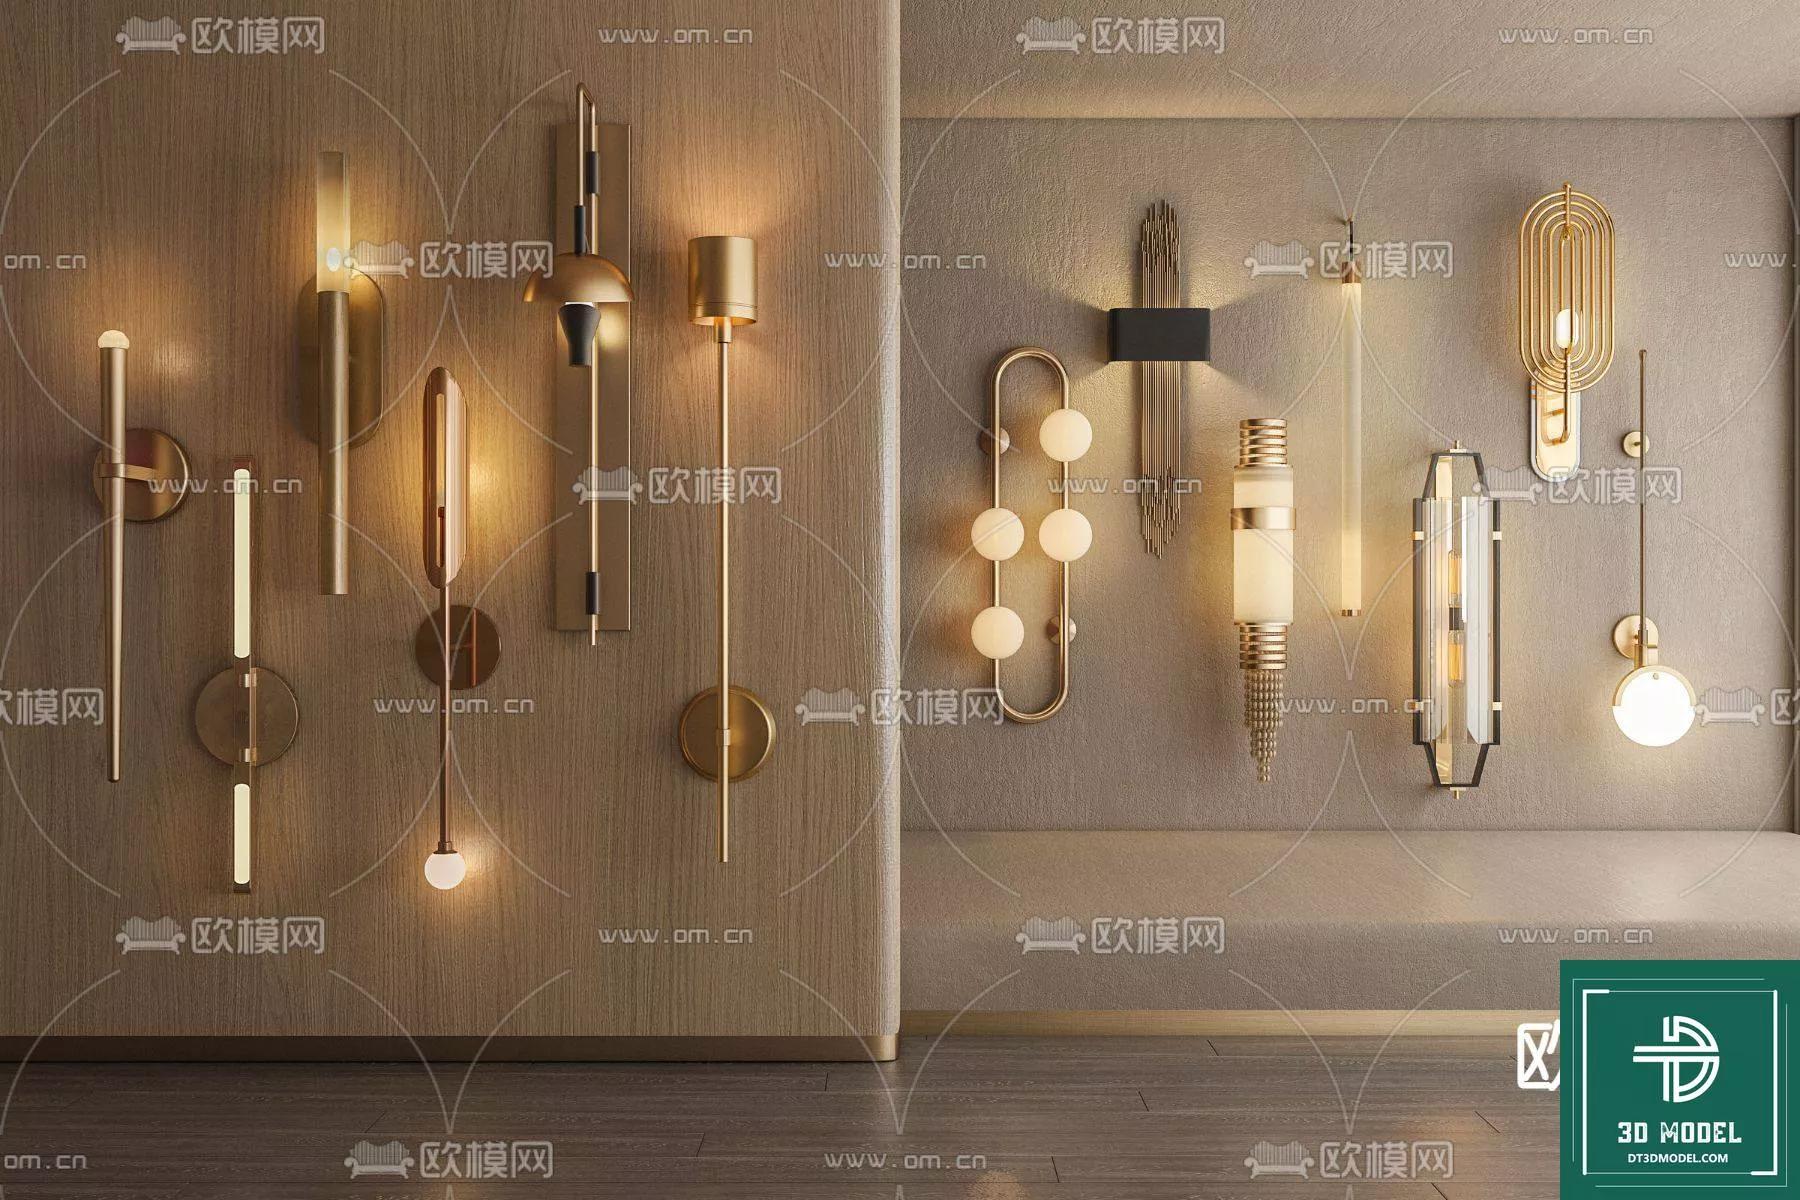 MODERN WALL LAMP - SKETCHUP 3D MODEL - VRAY OR ENSCAPE - ID16084